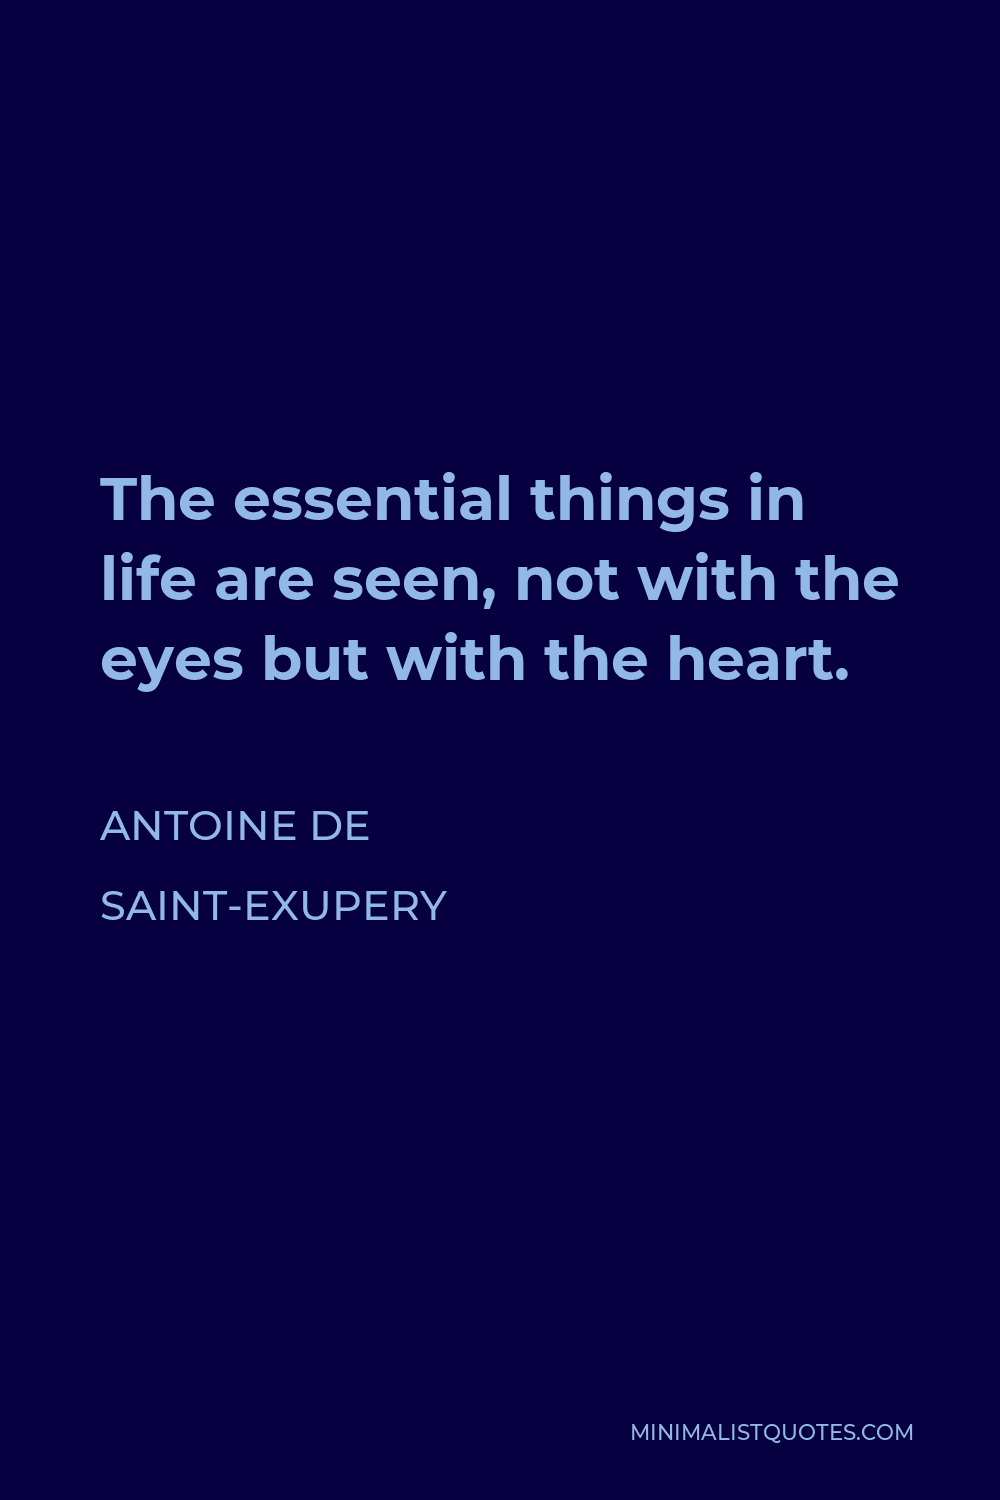 Antoine de Saint-Exupery Quote - The essential things in life are seen, not with the eyes but with the heart.